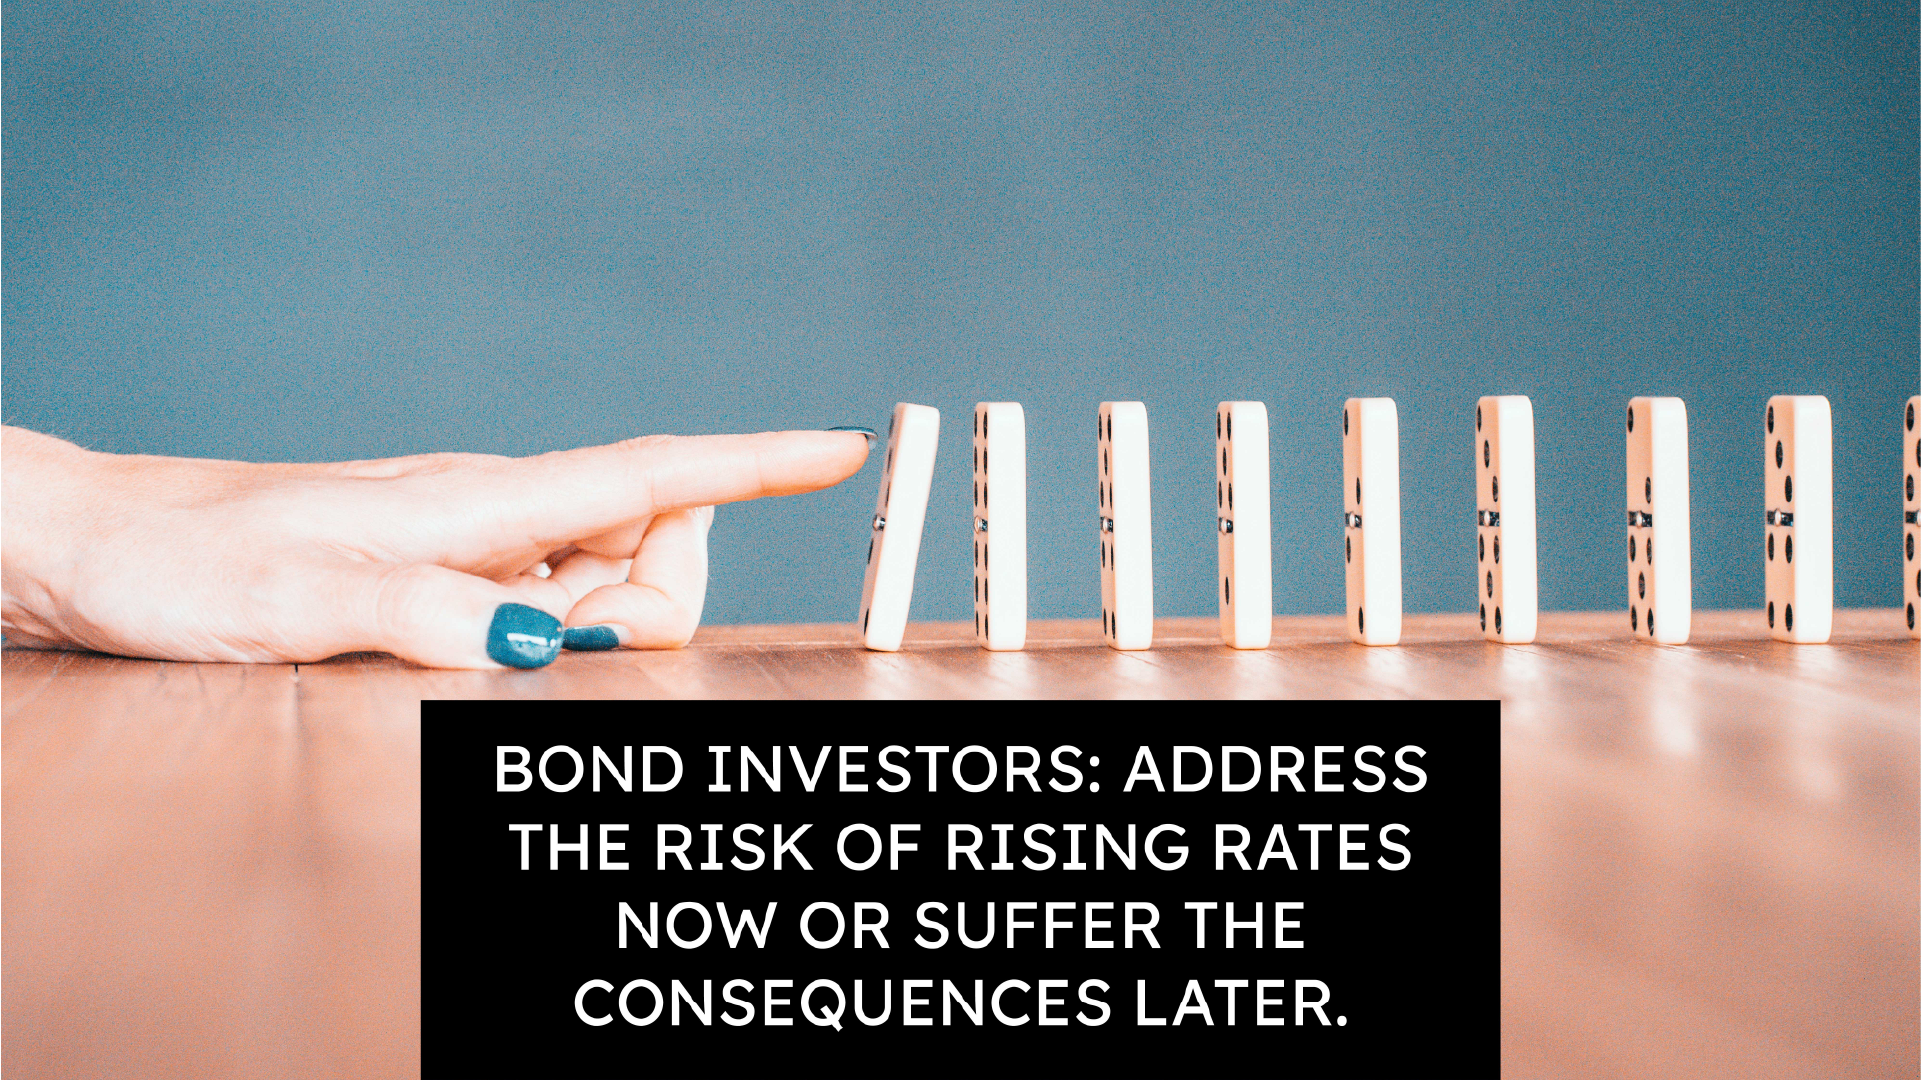 Bond investors: Address the risk of rising rates now or suffer the consequences later.